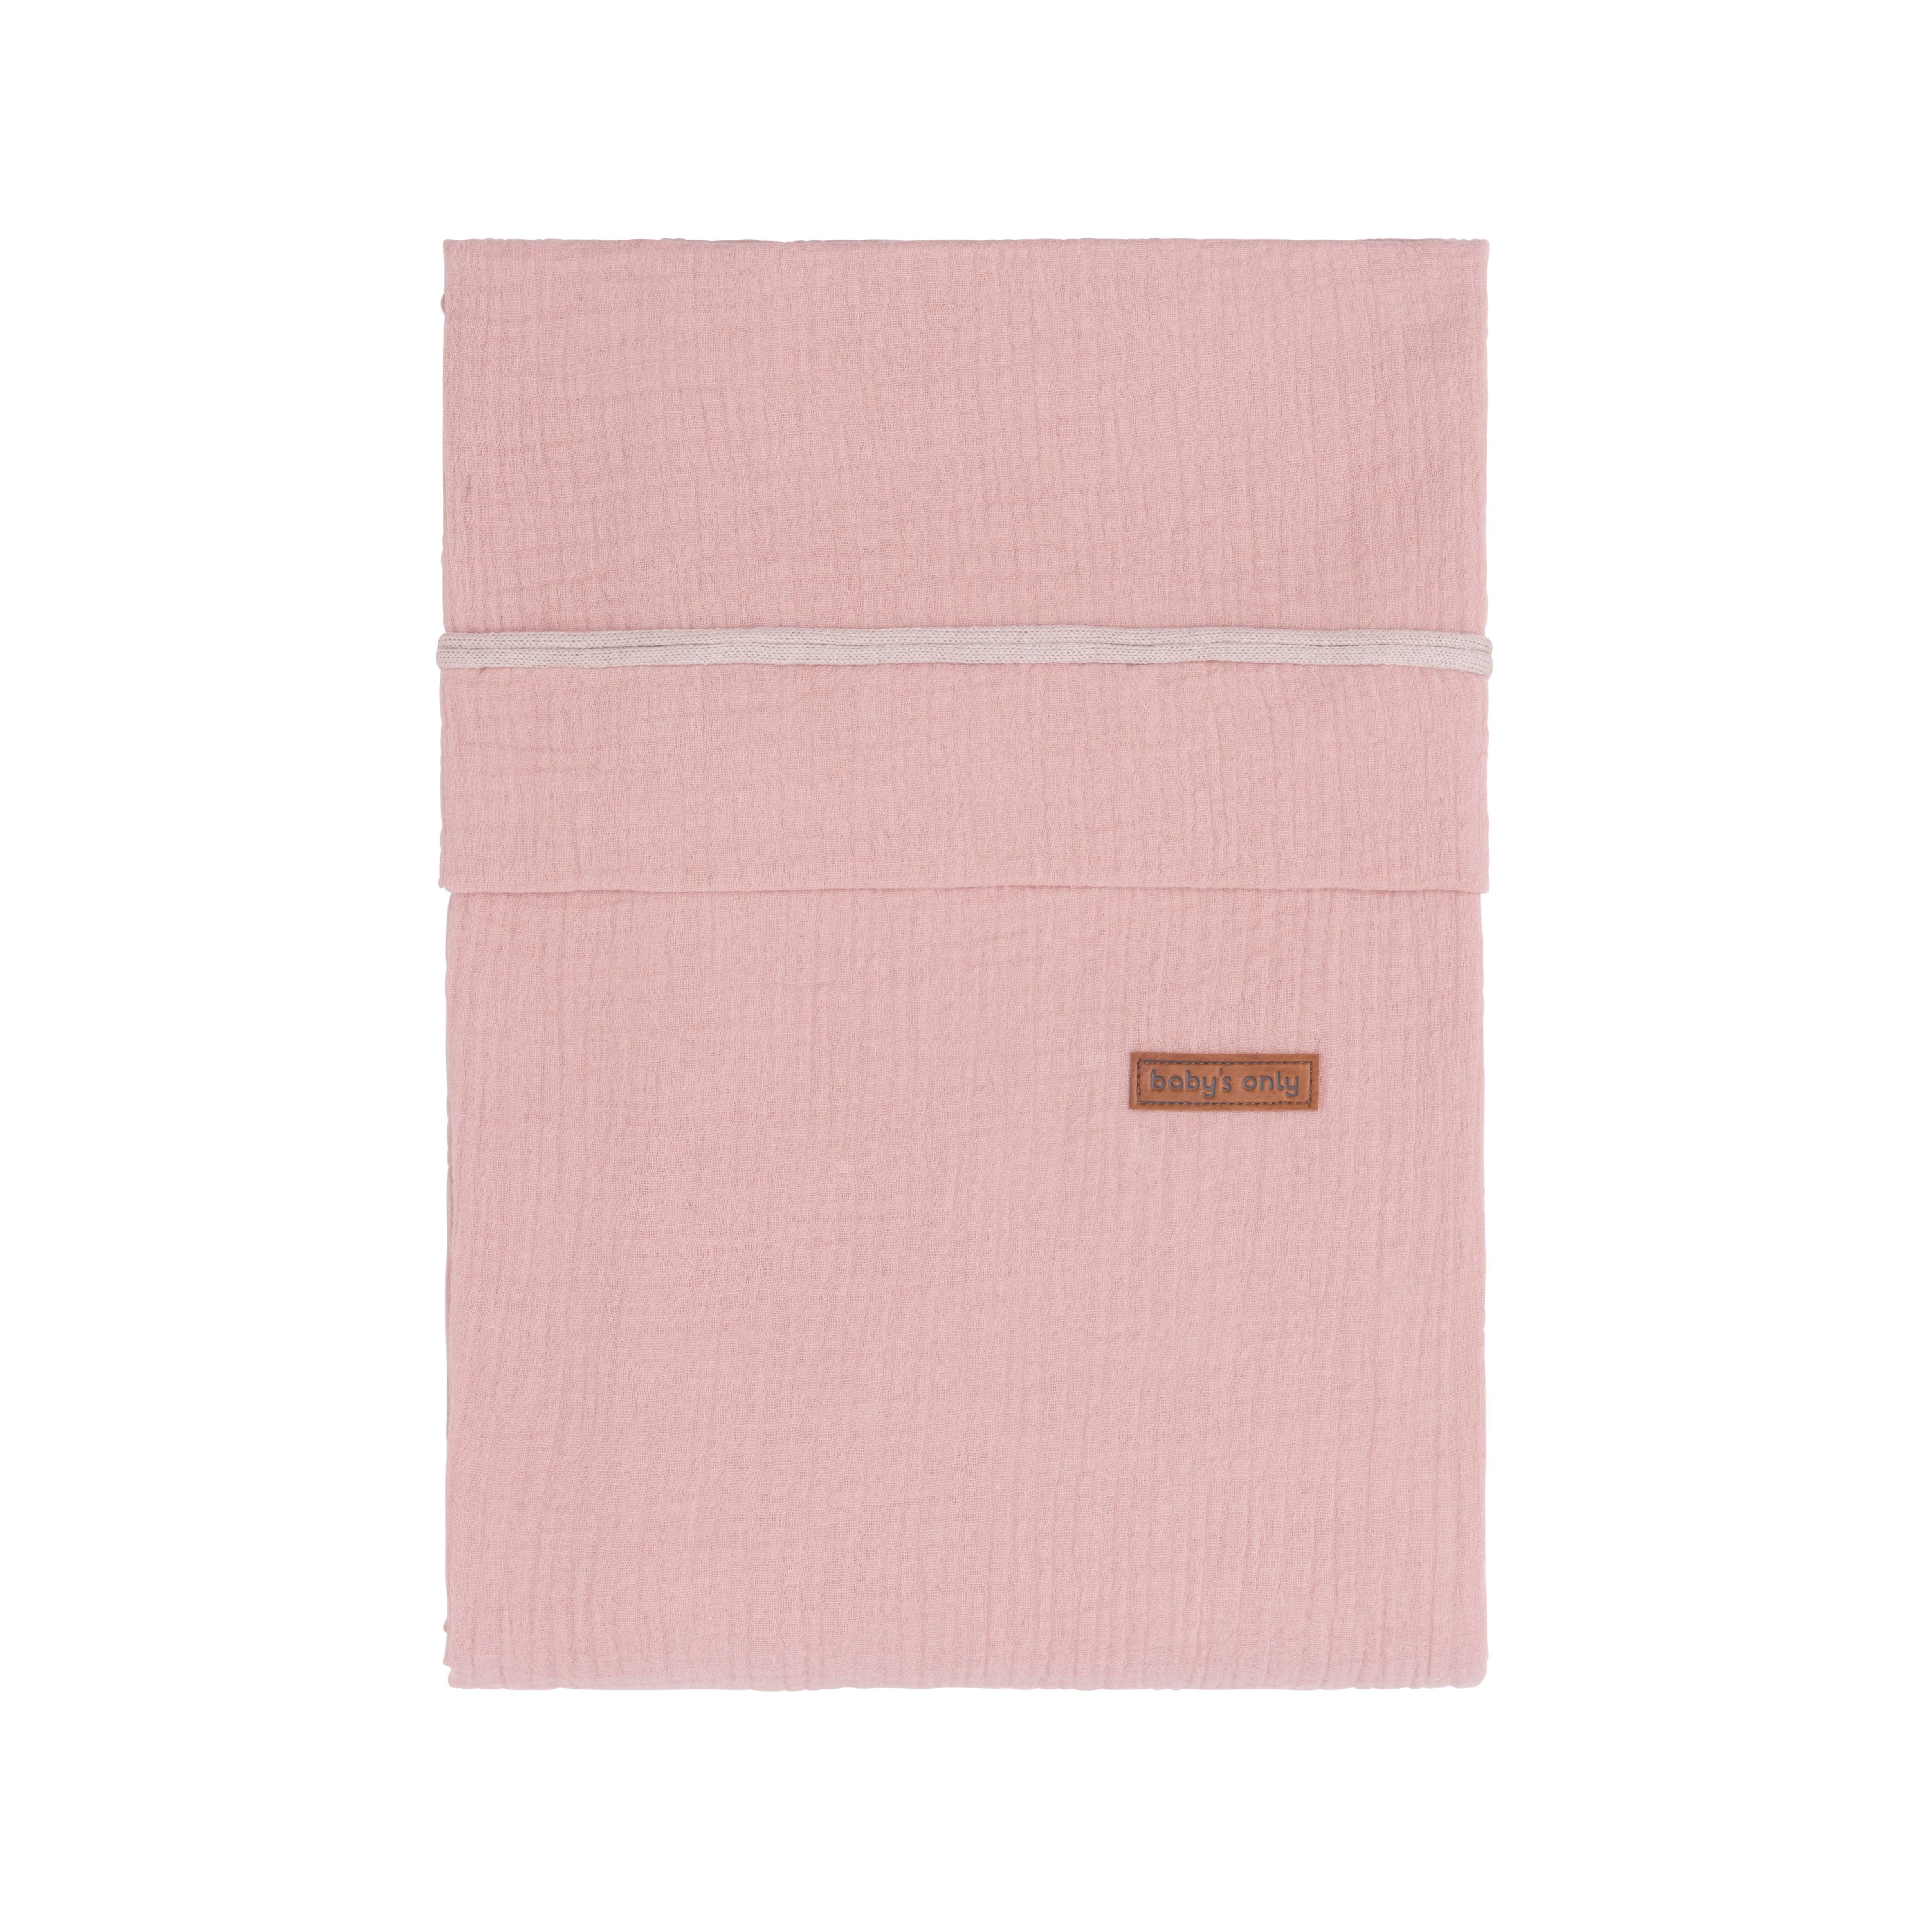 Duvet cover Breeze old pink - 100x135